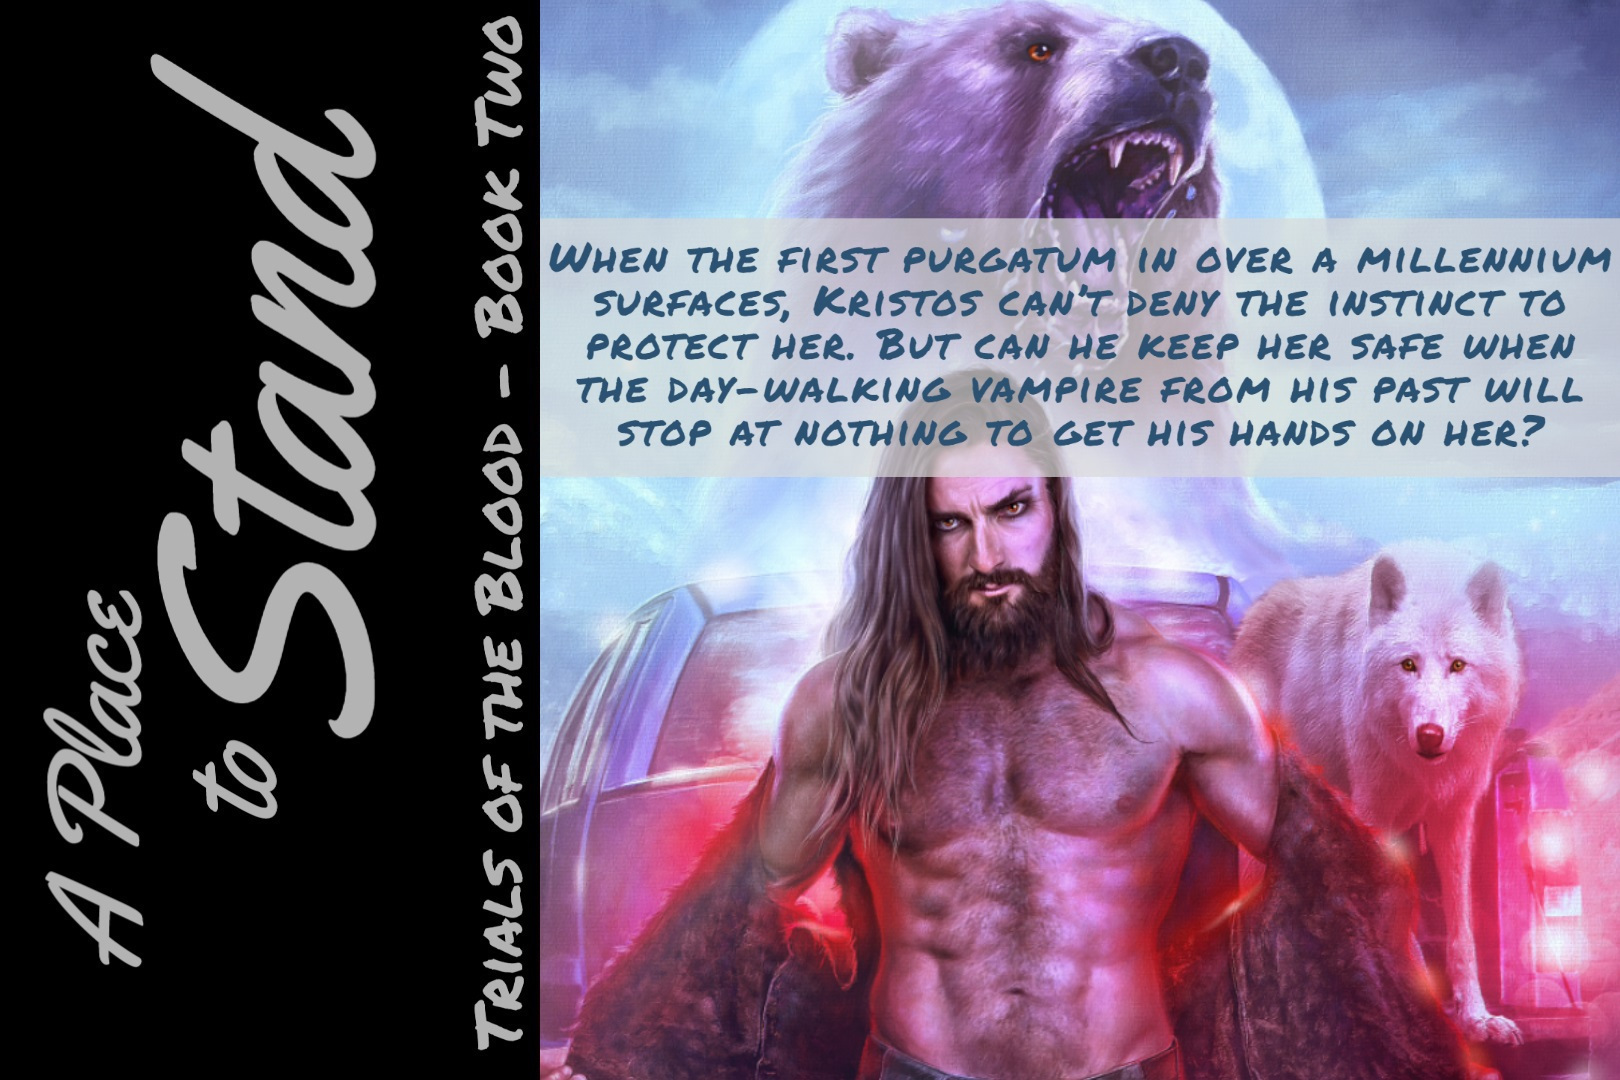 A PLACE TO STAND - TRIALS OF THE BLOOD, BOOK TWO - When the first purgatum in over a millennium surfaces, Kristos can't deny the instinct to protect her. But can he keep her safe when the albino daywalking vampire from his past will stop at nothing to get his hands on her? - Available NOW at all major retailers!